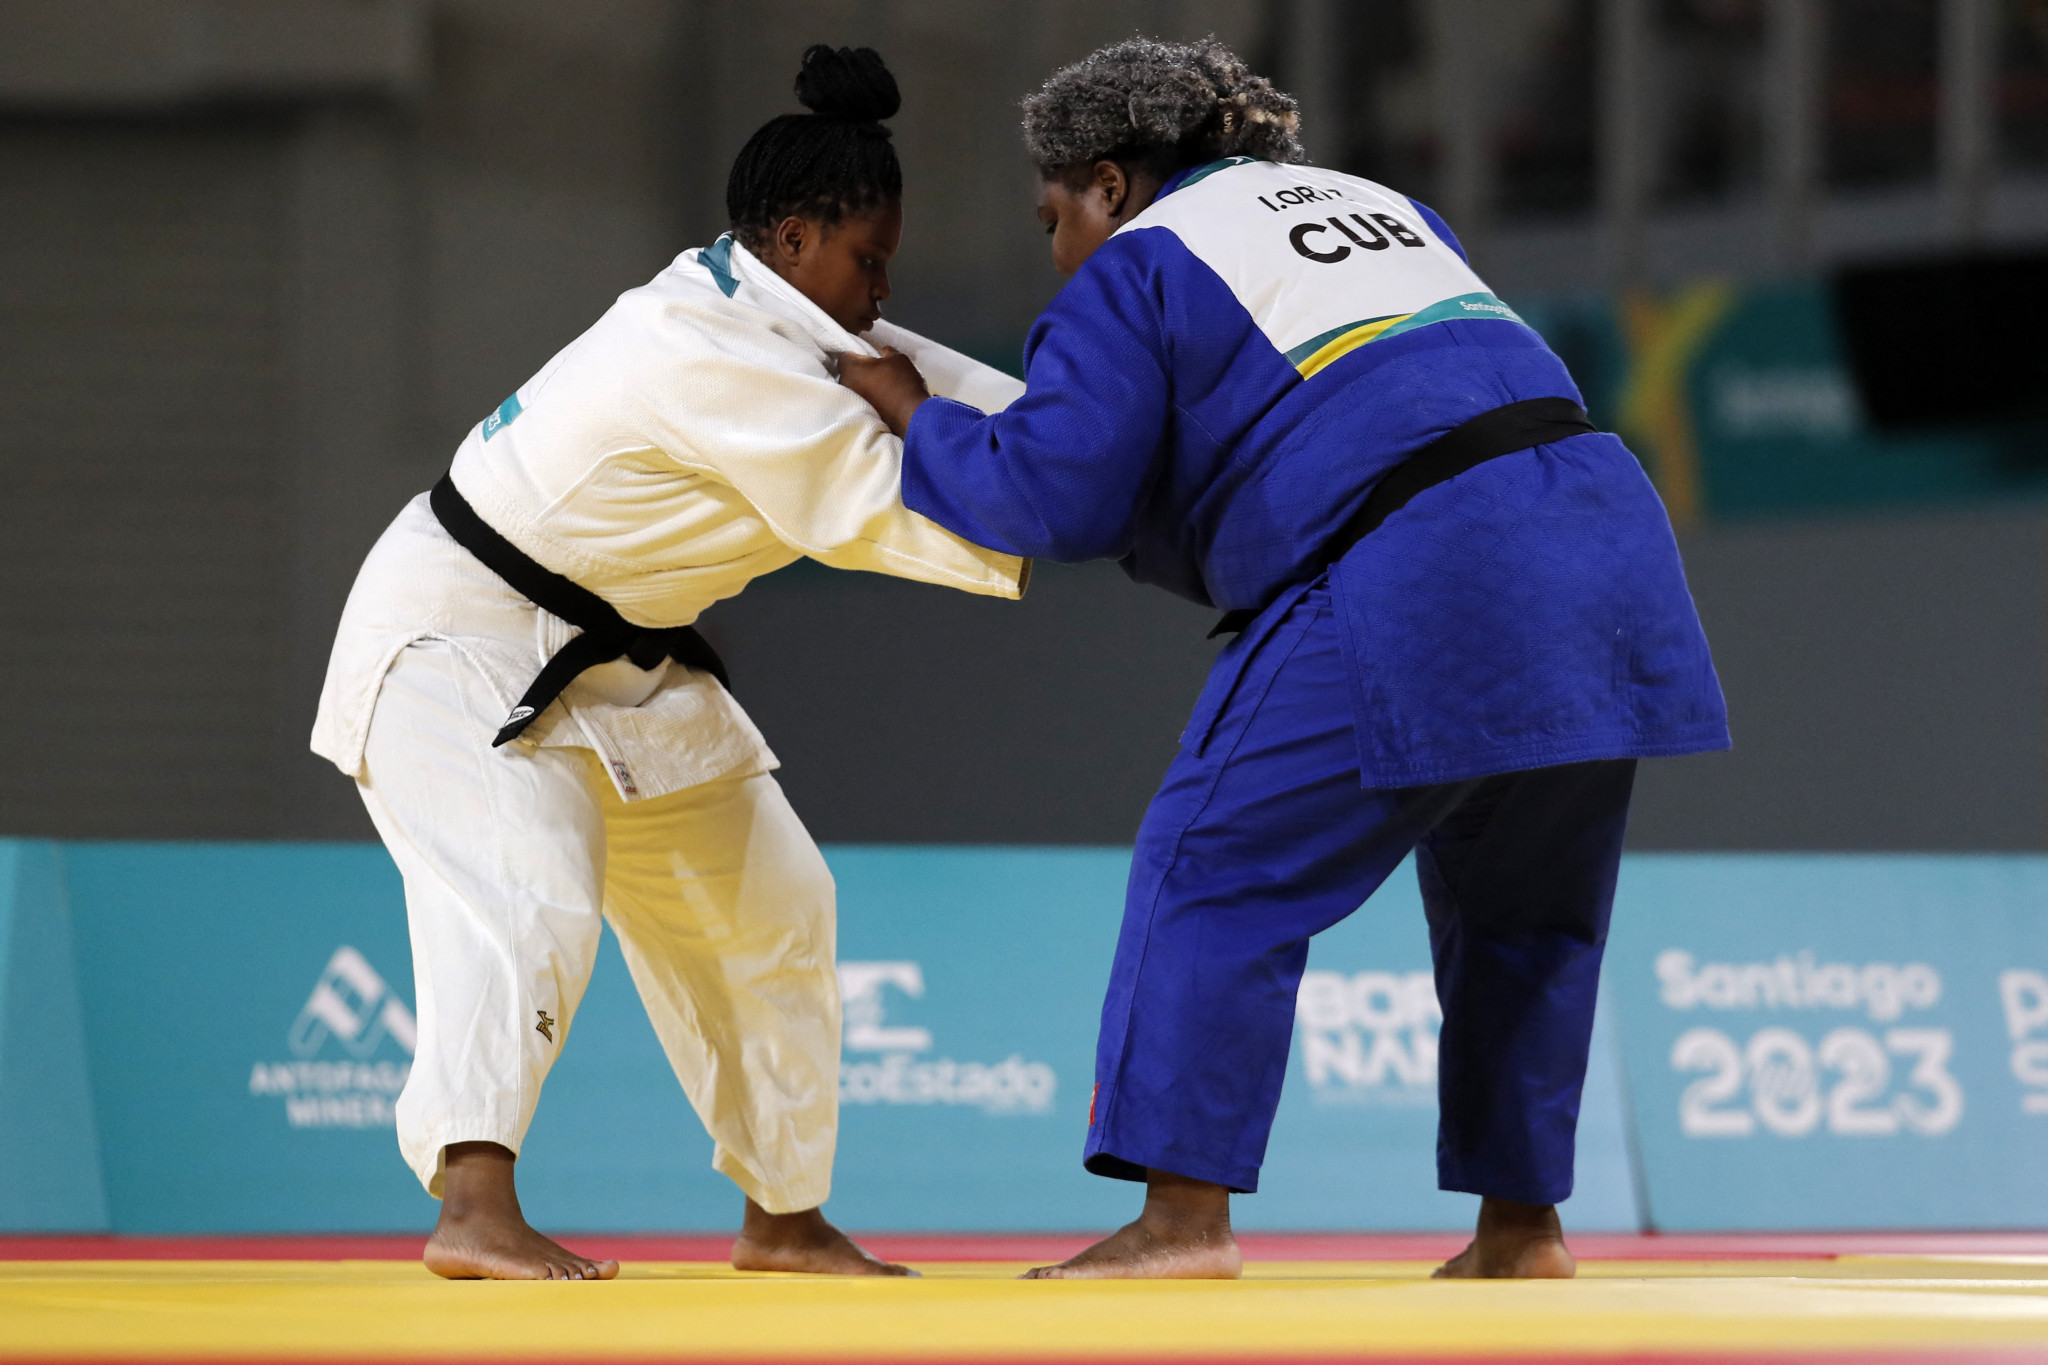 Cuba's Idalys Ortíz, right, won a record-equalling fourth consecutive judo gold at the Pan American Games against Colombia's Brigitte Carabali, left, in Santiago ©Getty Images